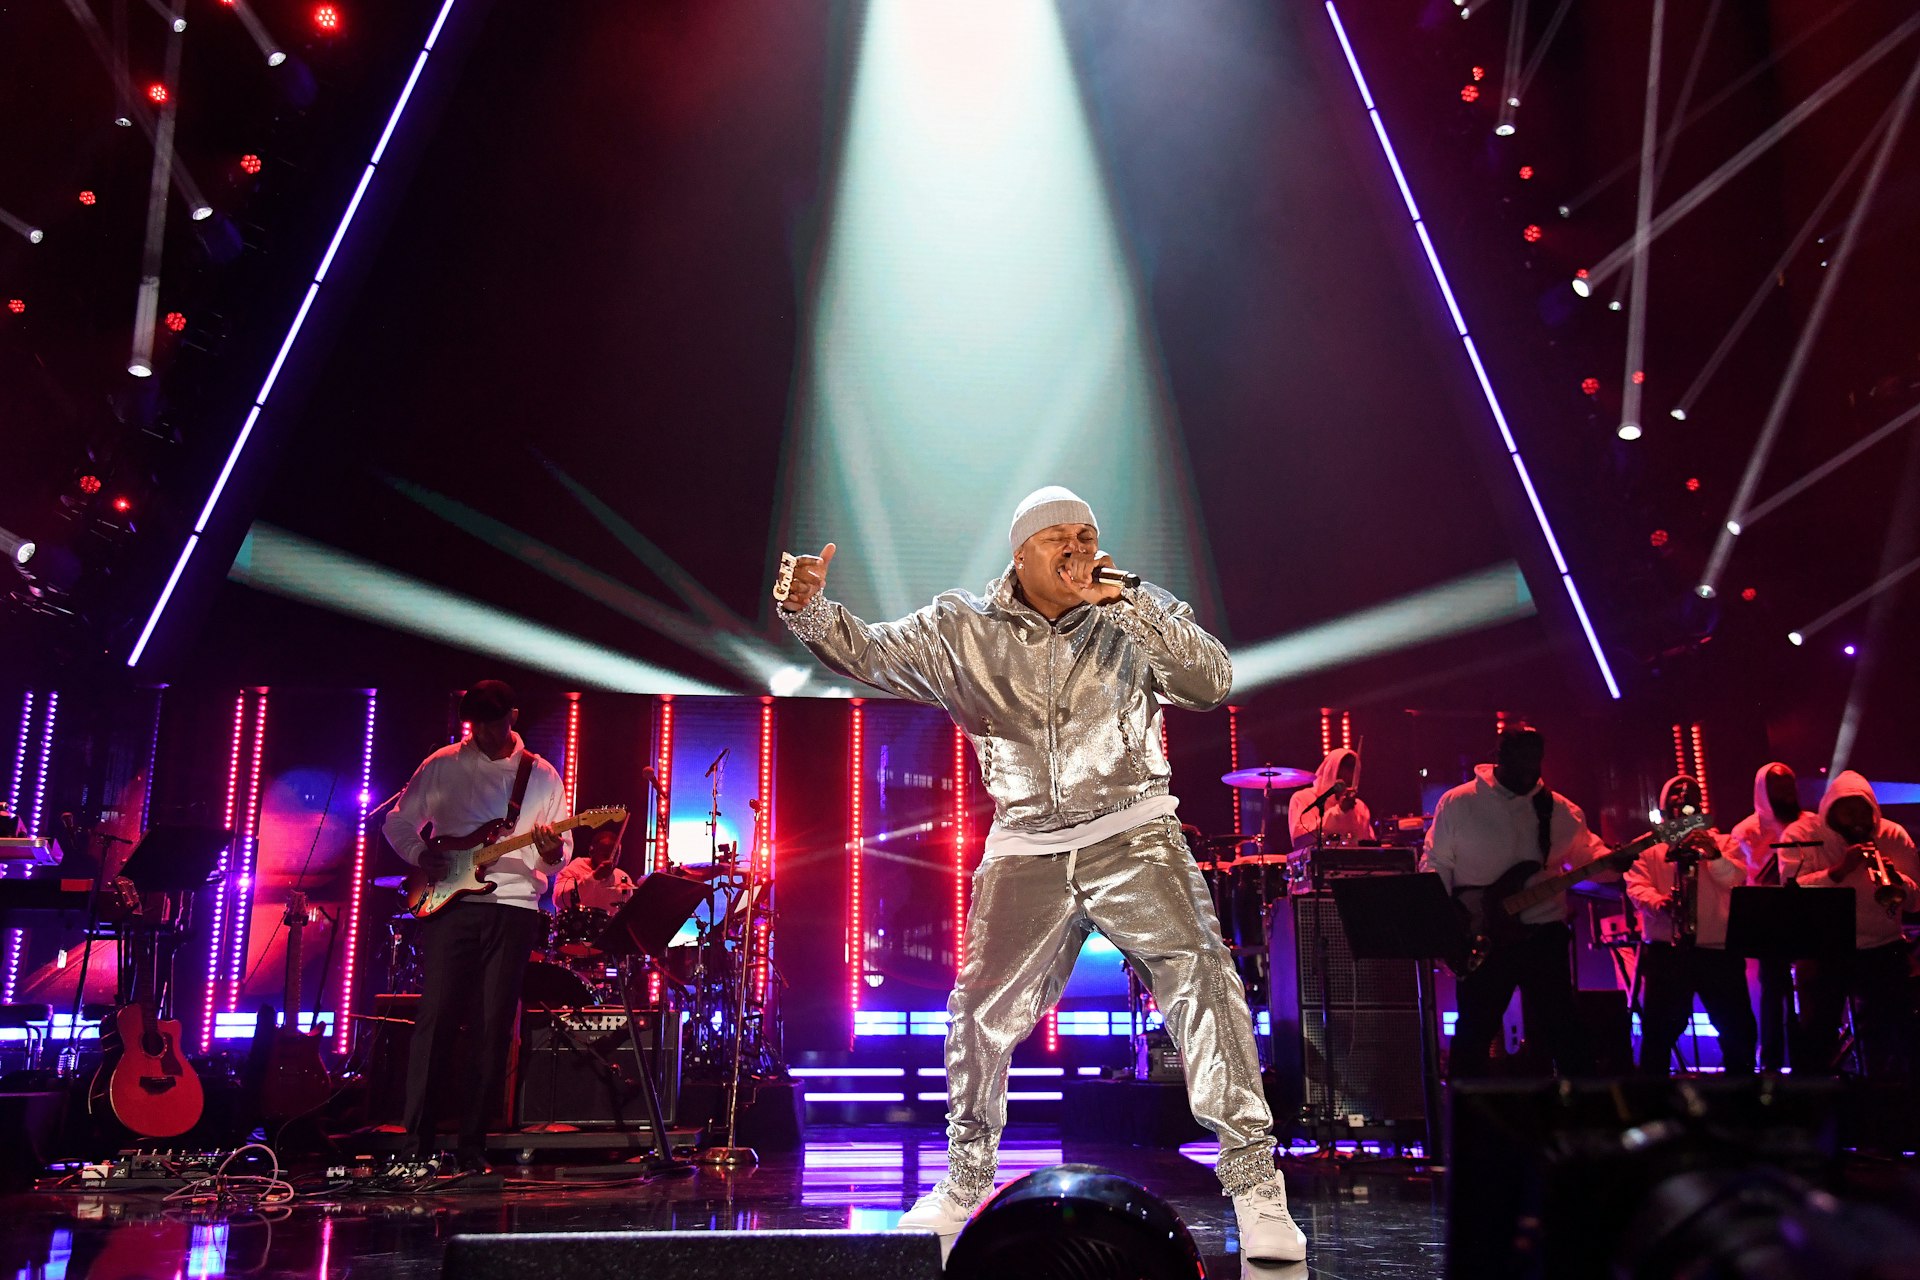 Rapper LL Cool J in a silver jogging suit performs in front of a band. 